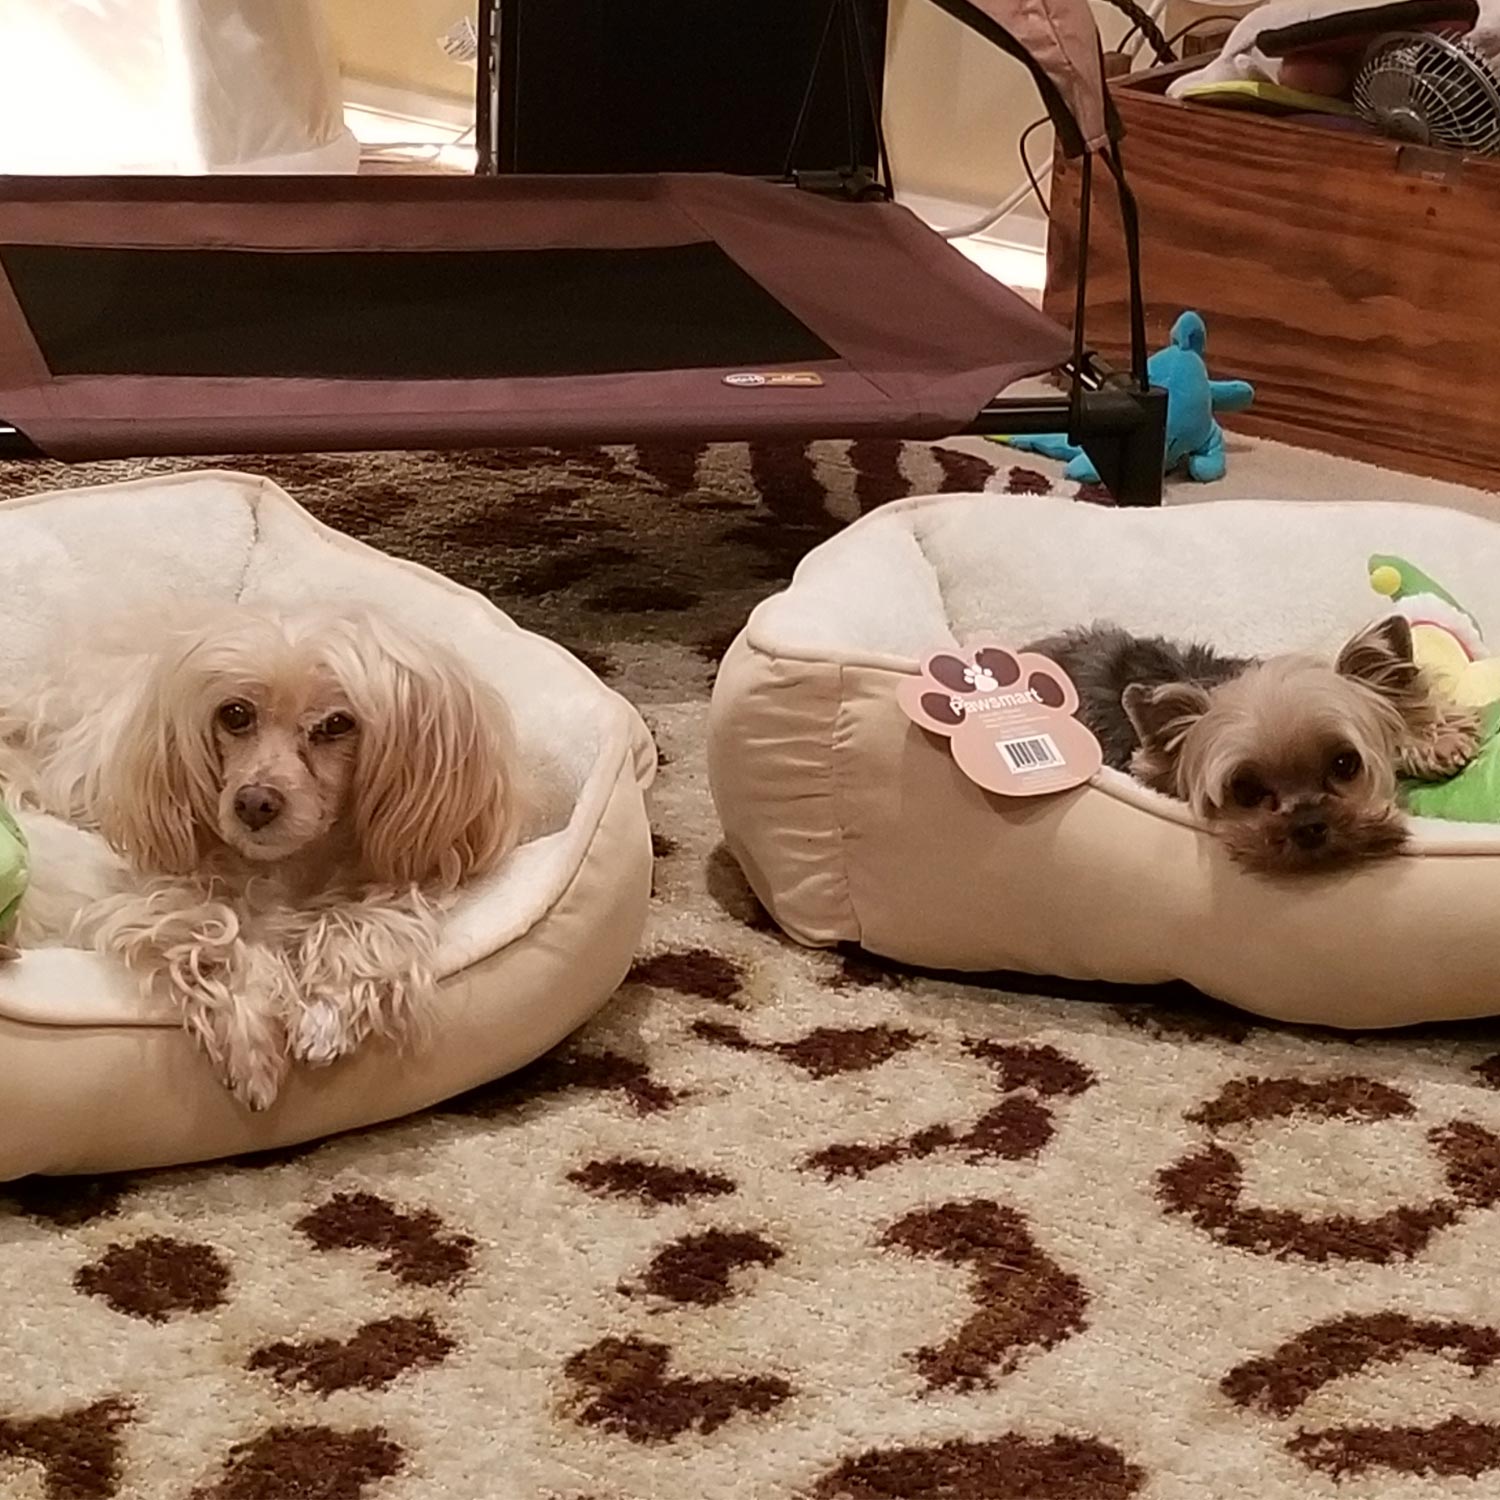 Pamela g In menifee ca sent a picture of her two furry family members chipper and william in their dog beds each with a new toy from santa paws